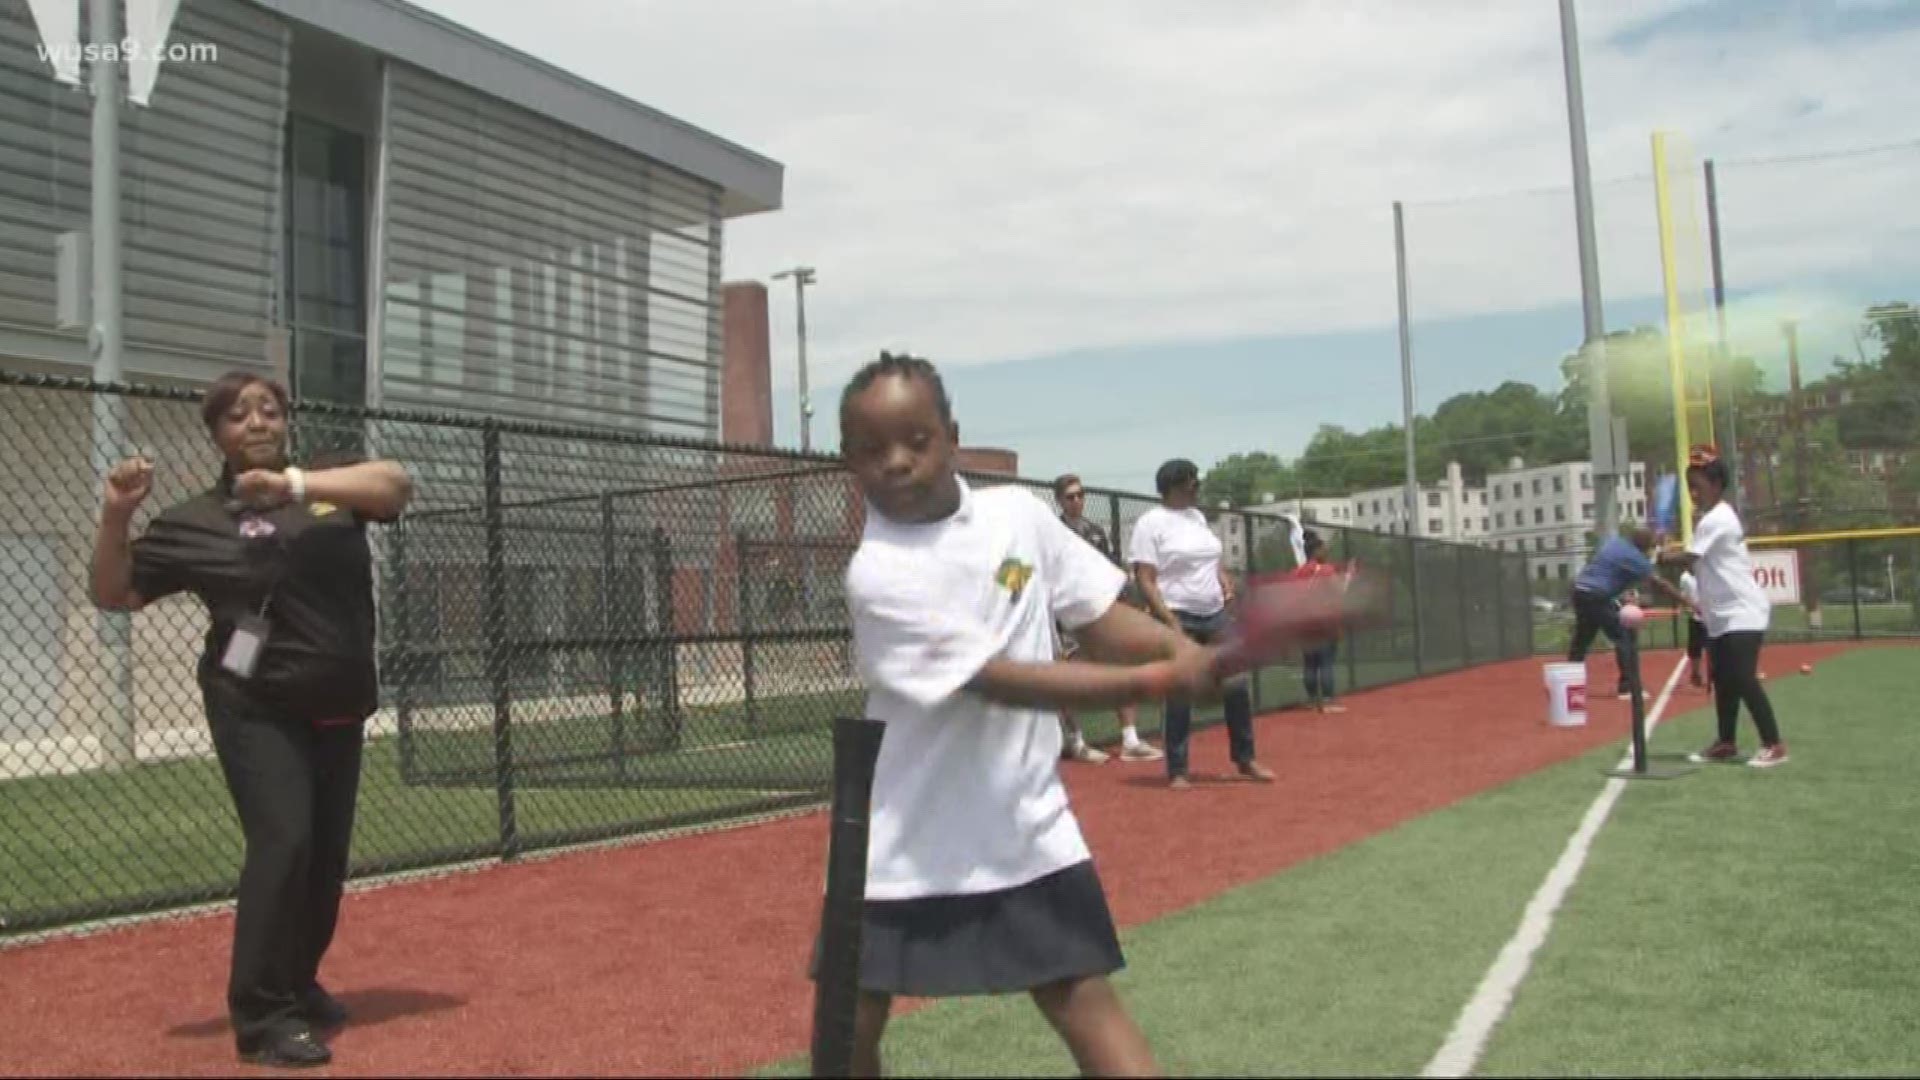 Elementary school students from The Children’s Guild Schools played hooky Friday to participate in a baseball clinic at the Washington Nationals Youth Baseball Academy.